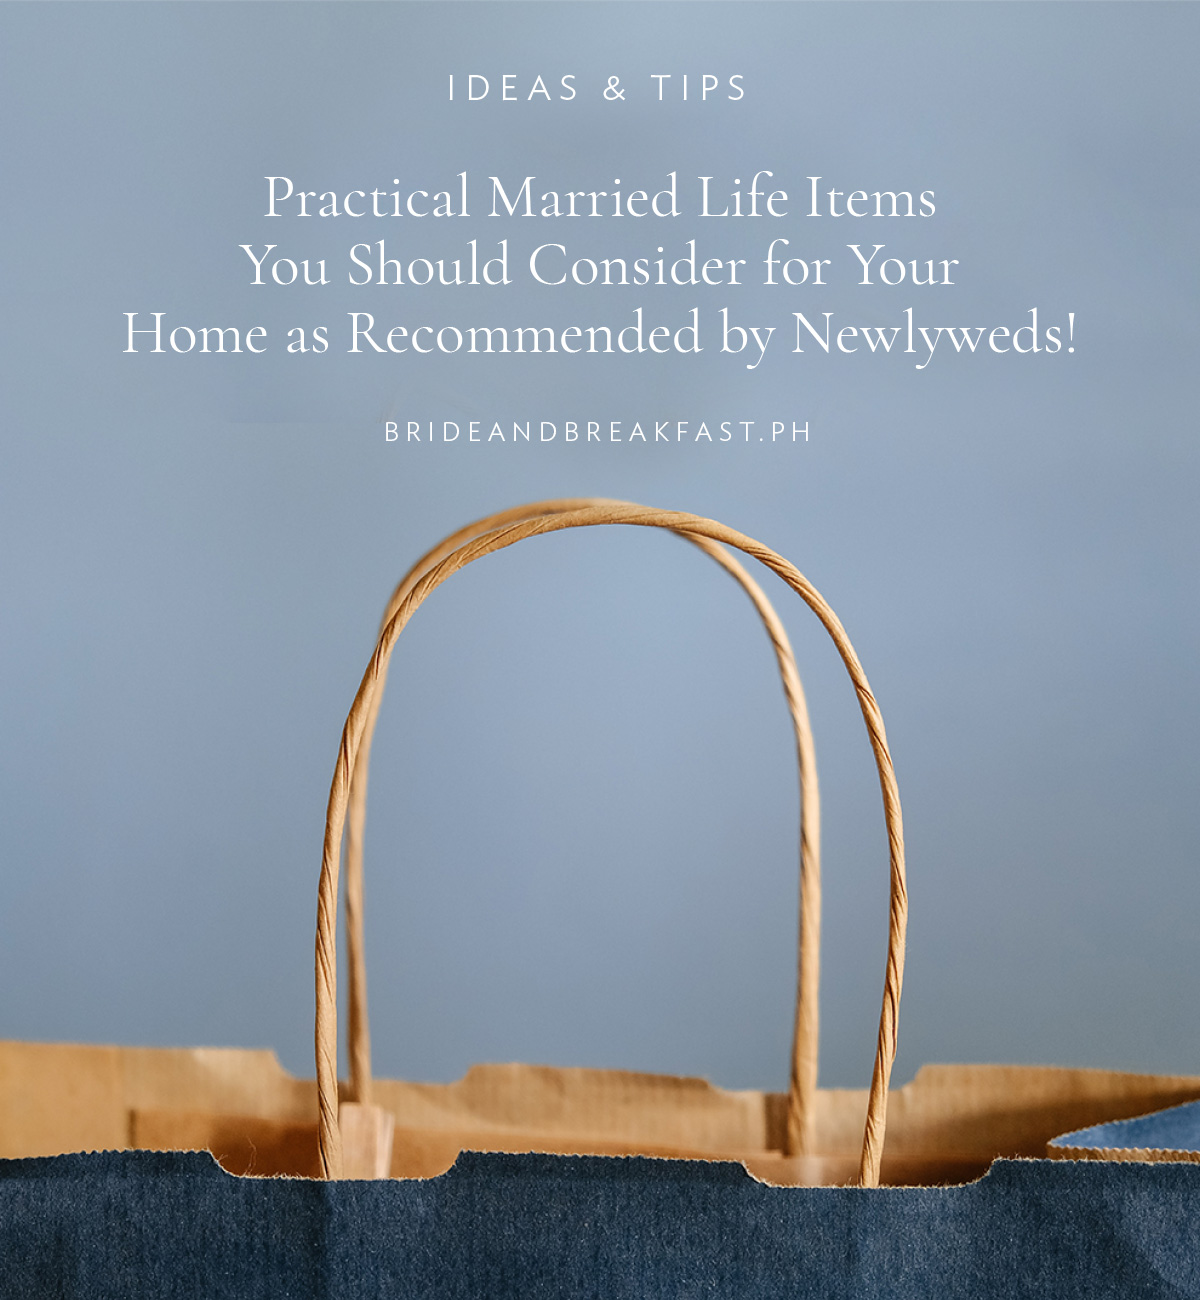 Practical Married Life Items You Should Consider for Your Home as Recommended by Newlyweds!